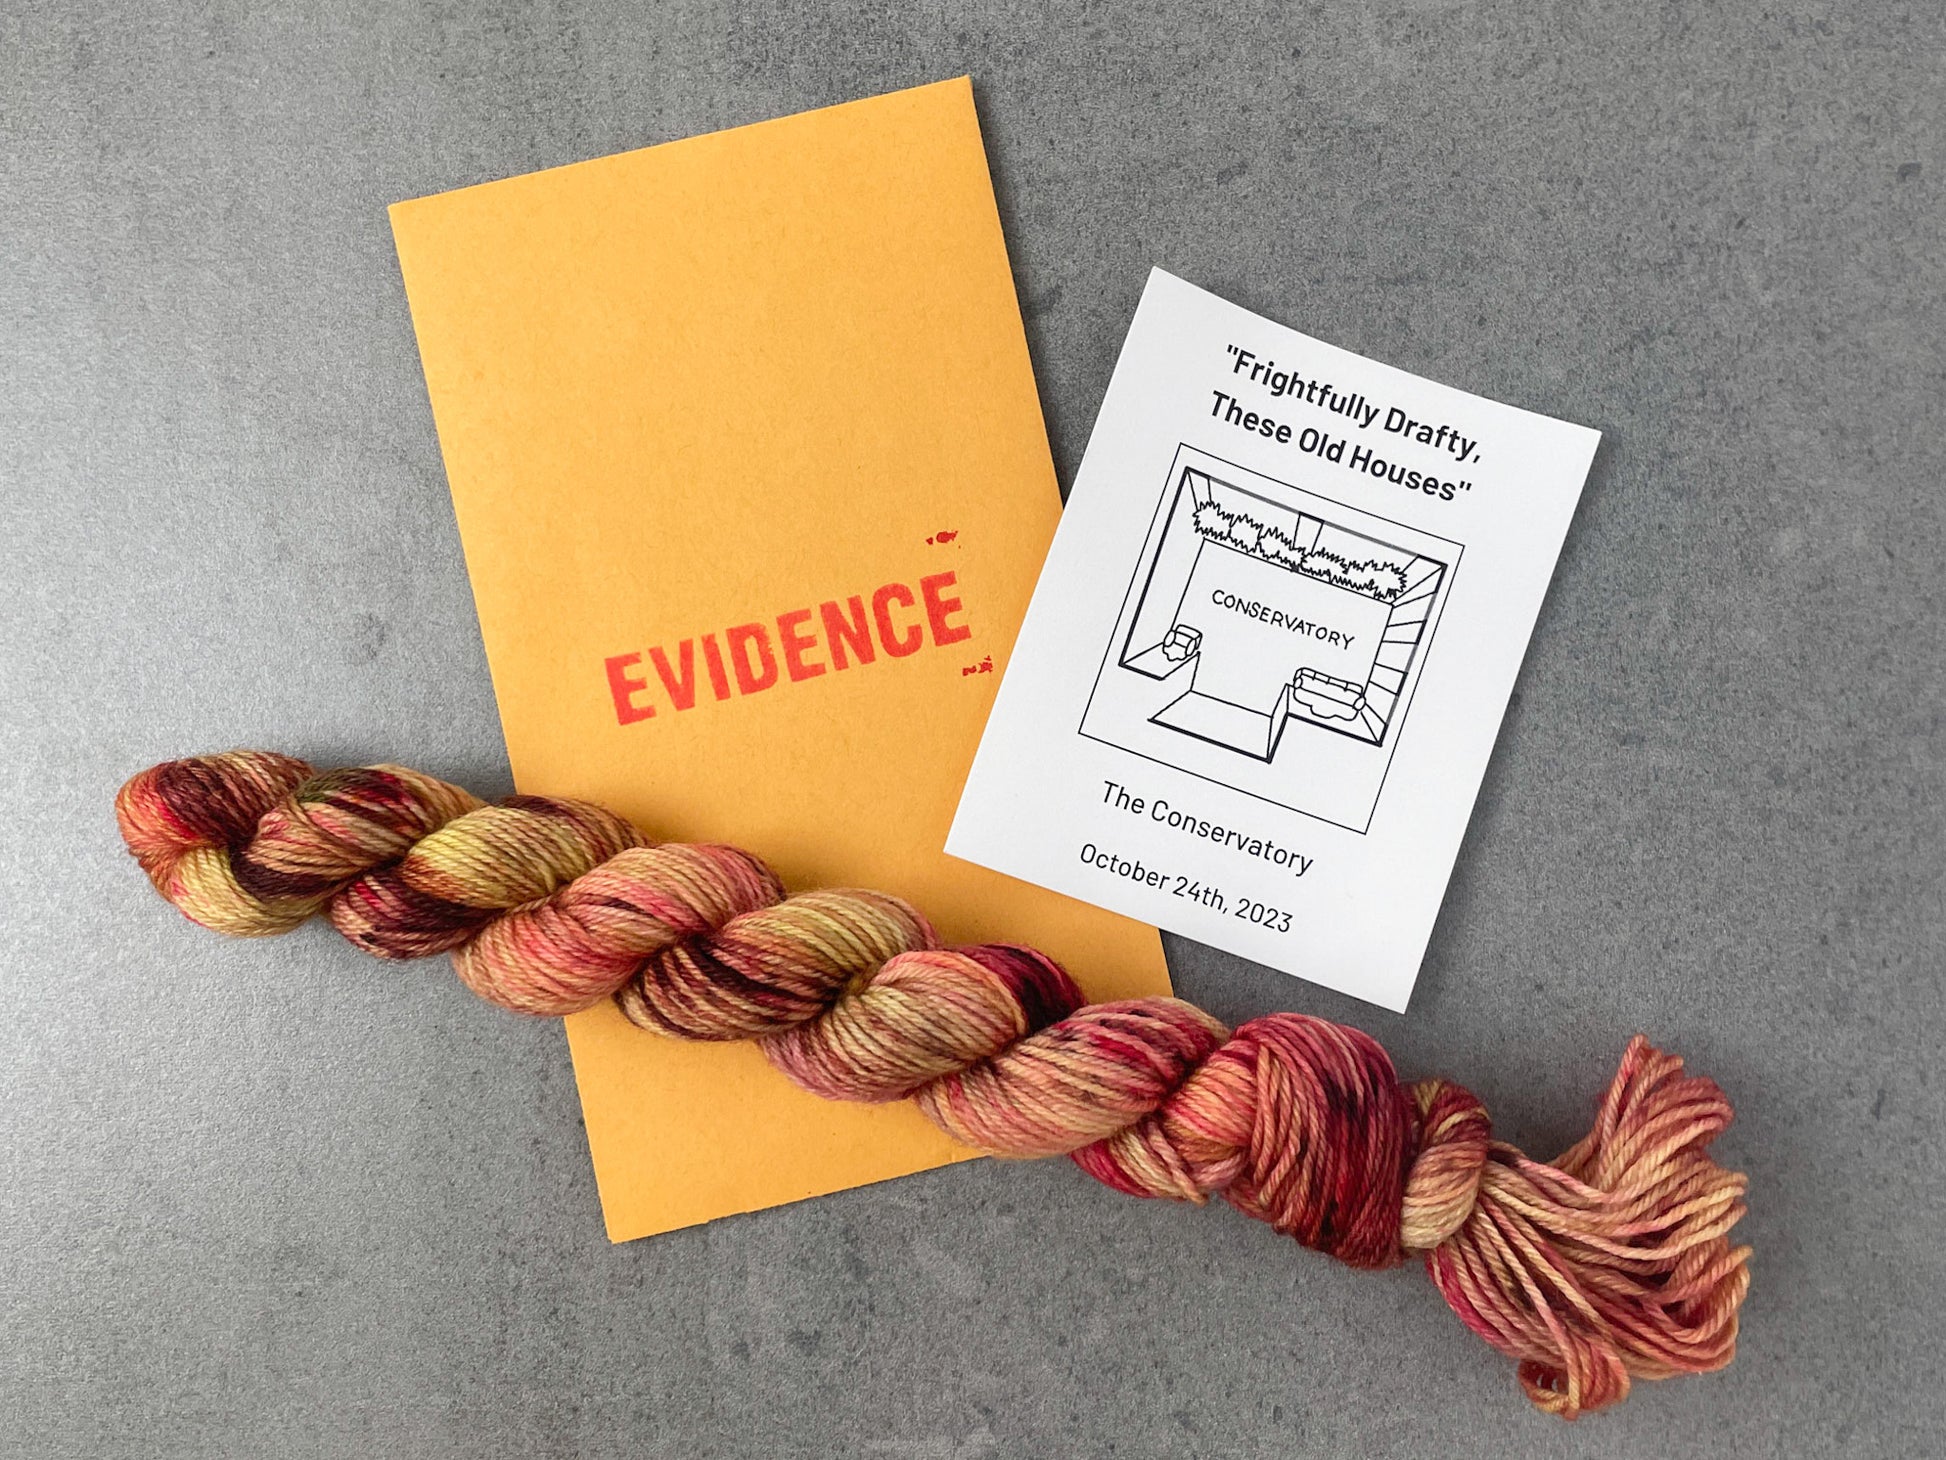 A skein of red, yellow, and pink yarn on top of an envelope stamped with "Evidence" and a card with an overhead drawing of the conservatory on it.